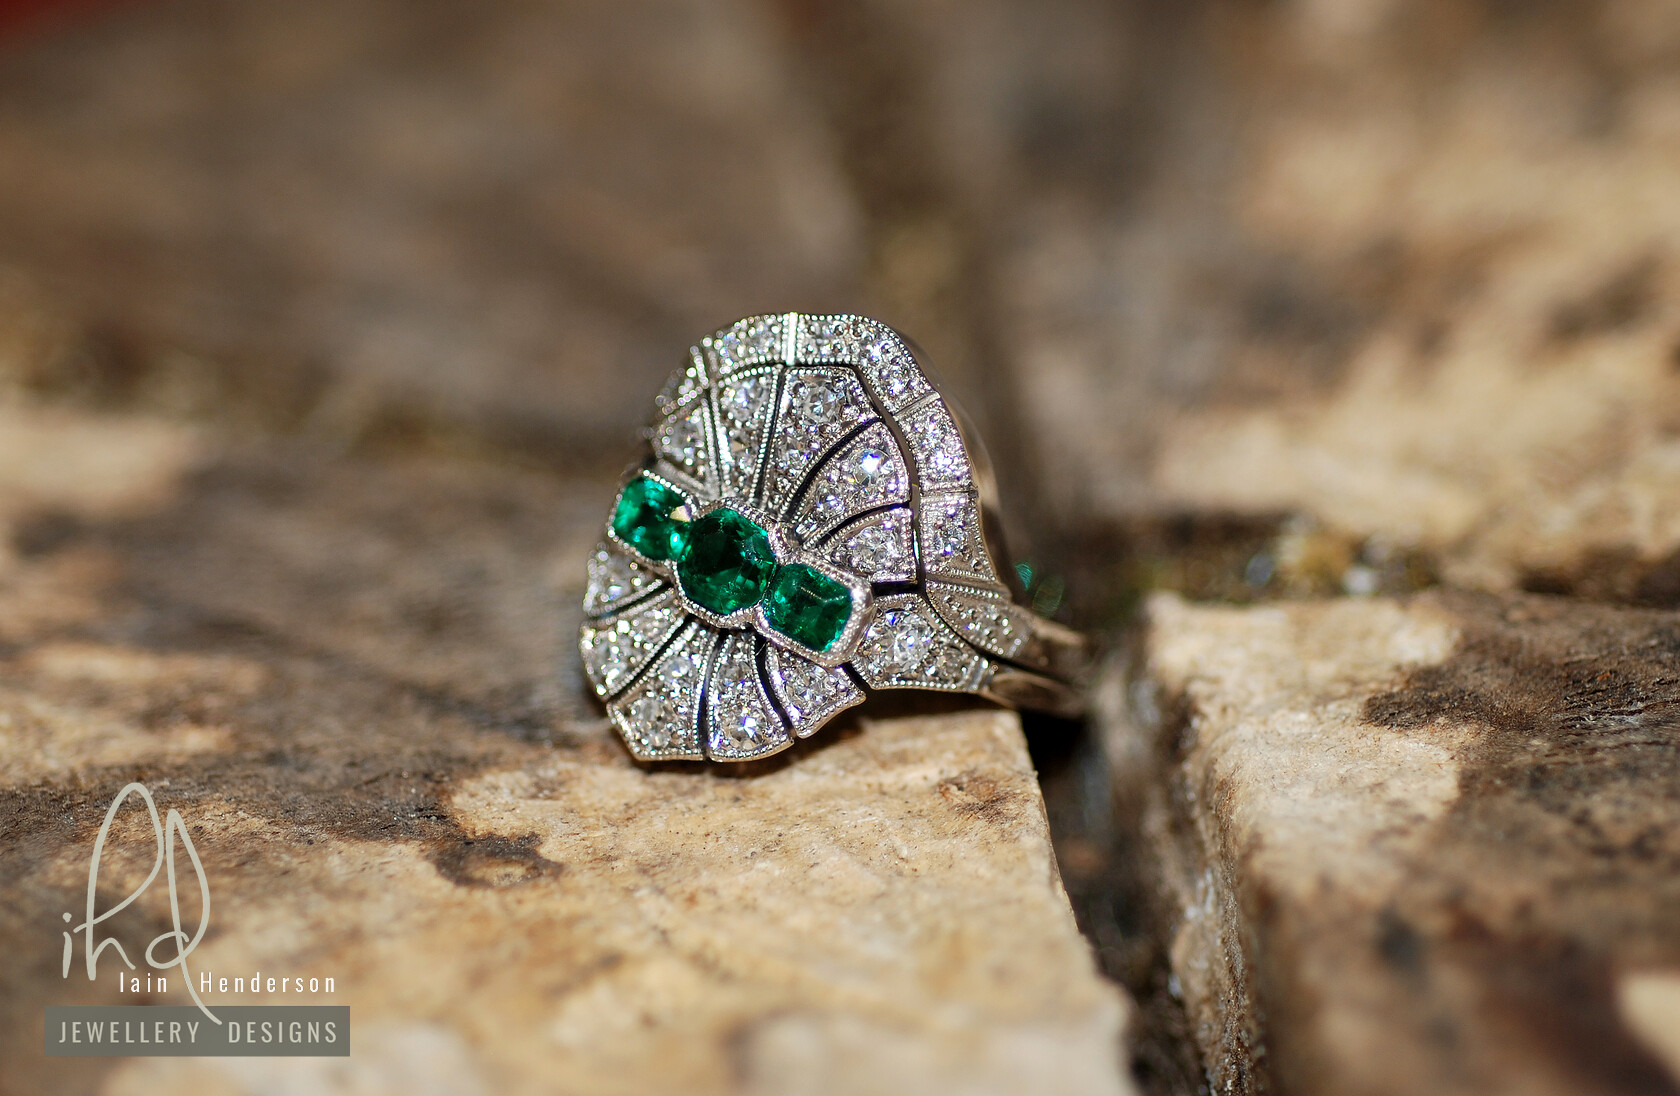 Bespoke art deco style engagement ring with diamonds and emeralds, and a shaped to fit wedding ring